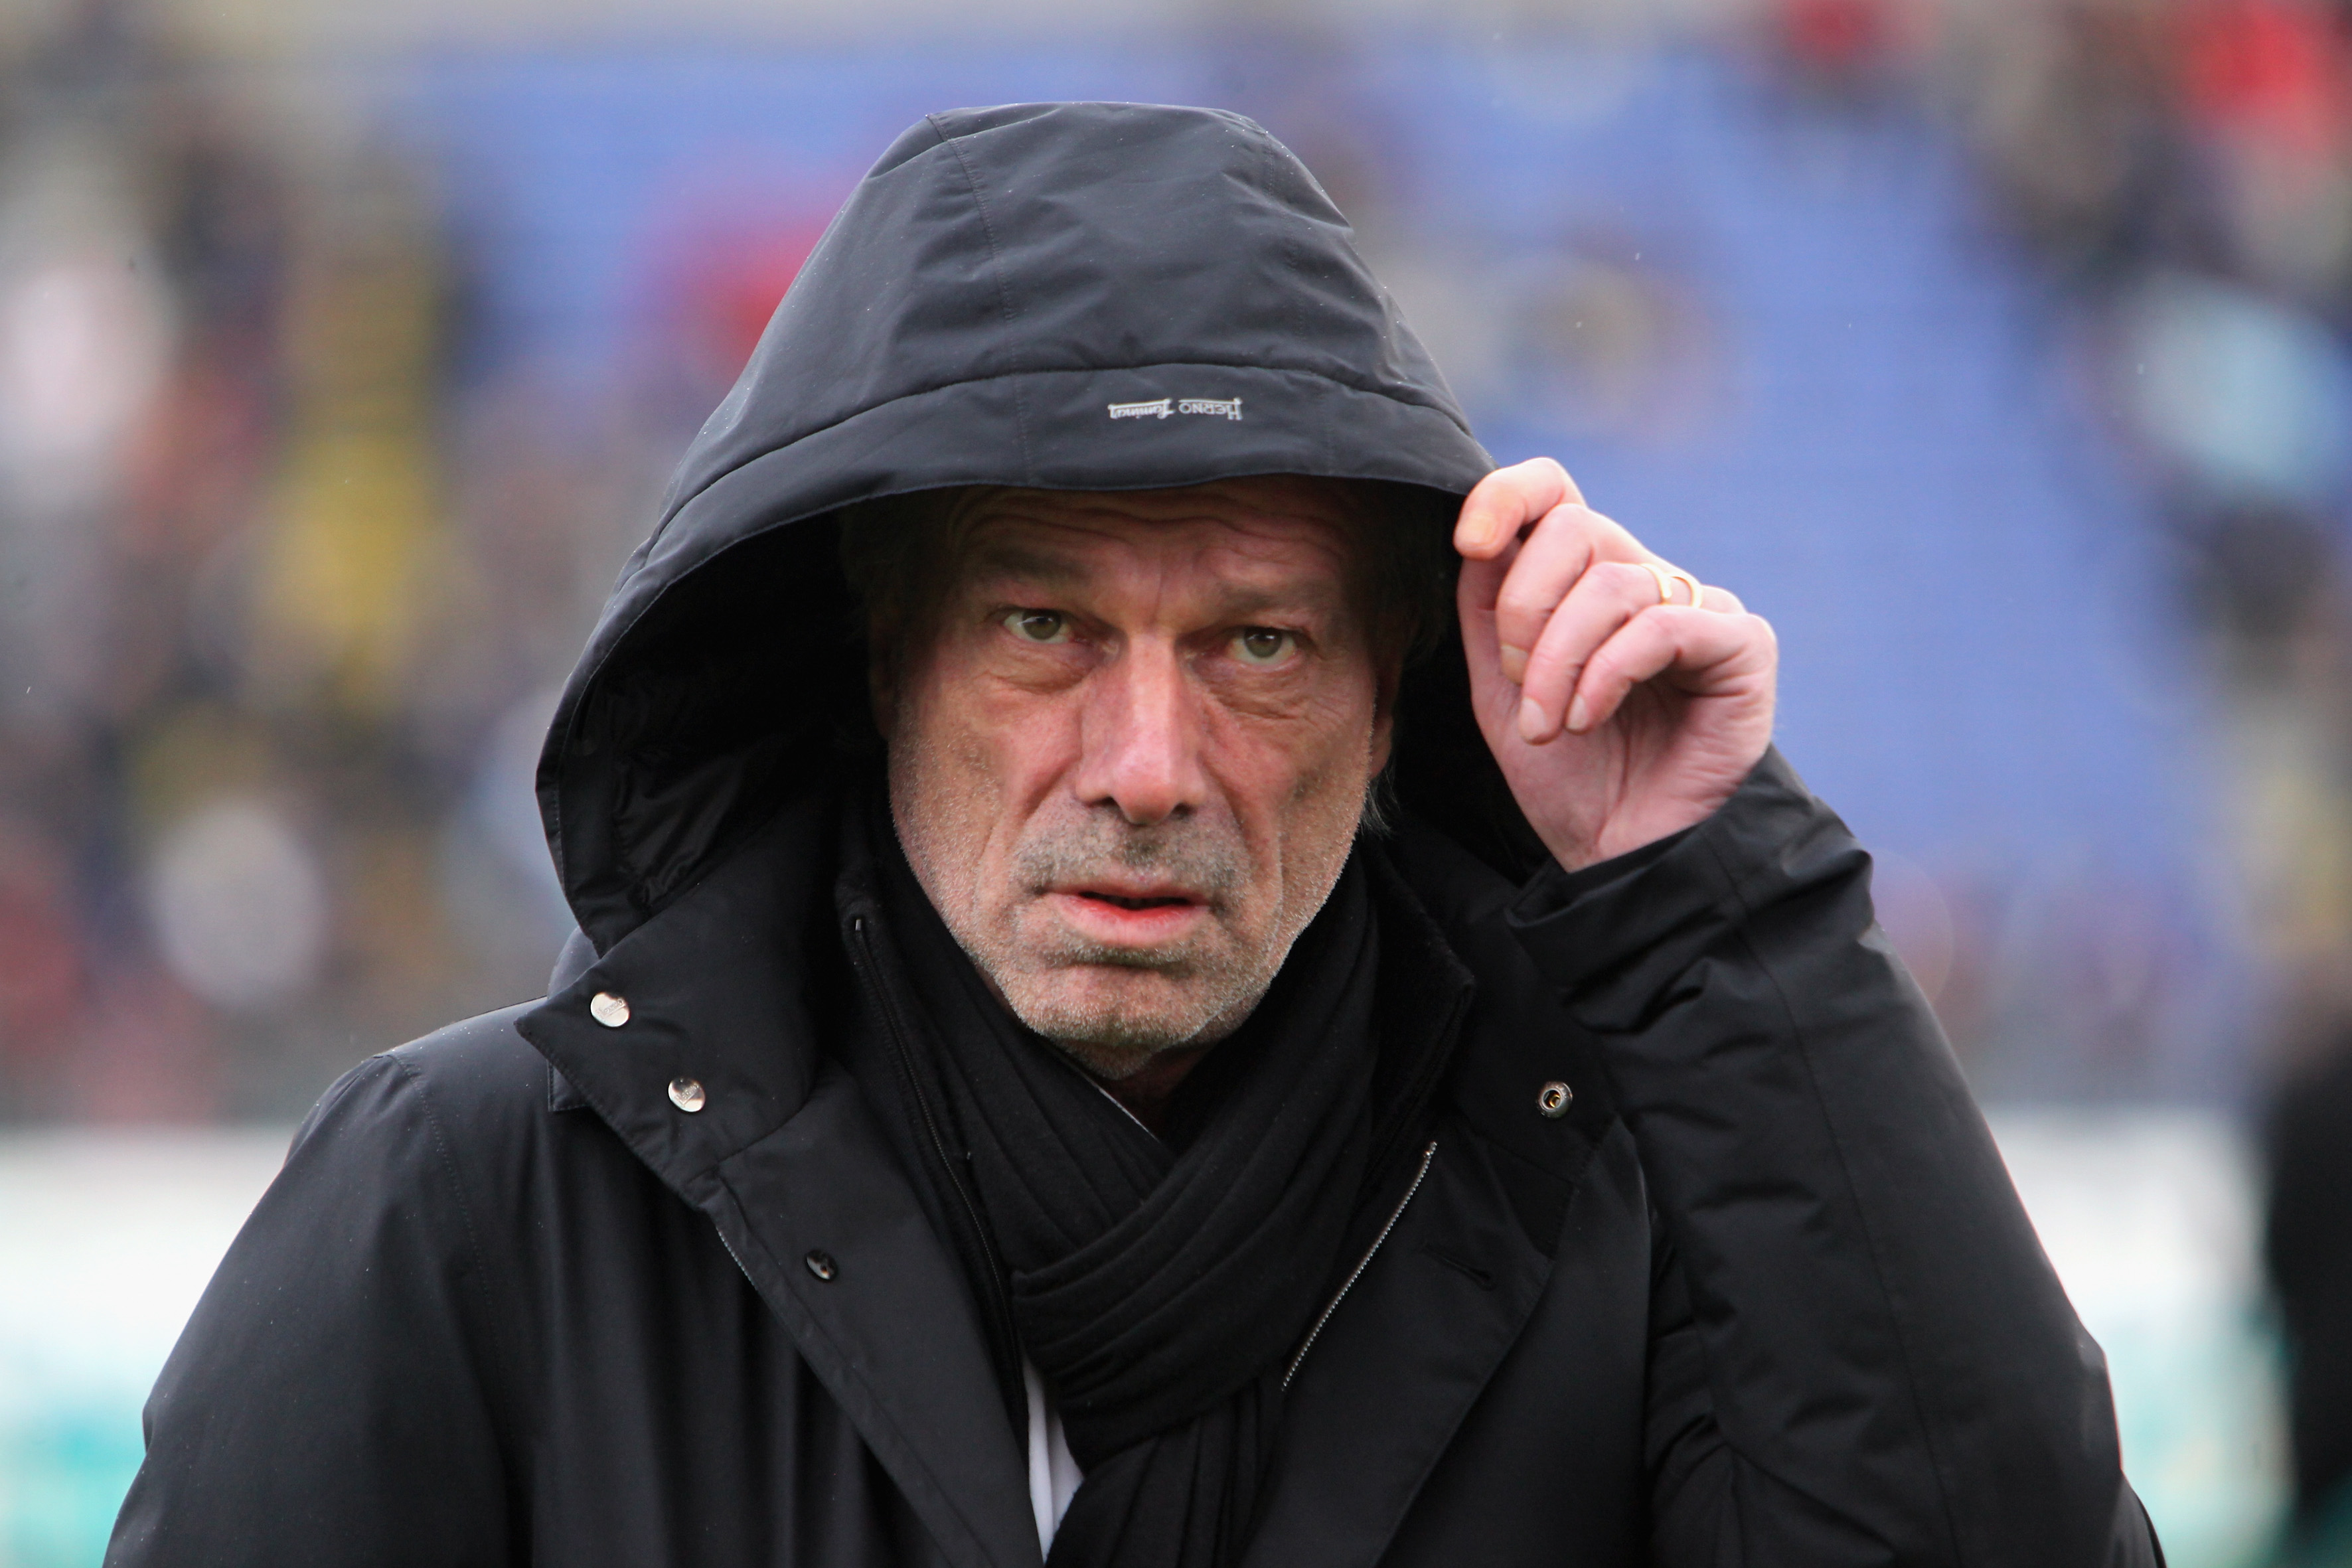 Brehme: “I am convinced with the arrival of Sabatini, Inter can go back to winning ways.”